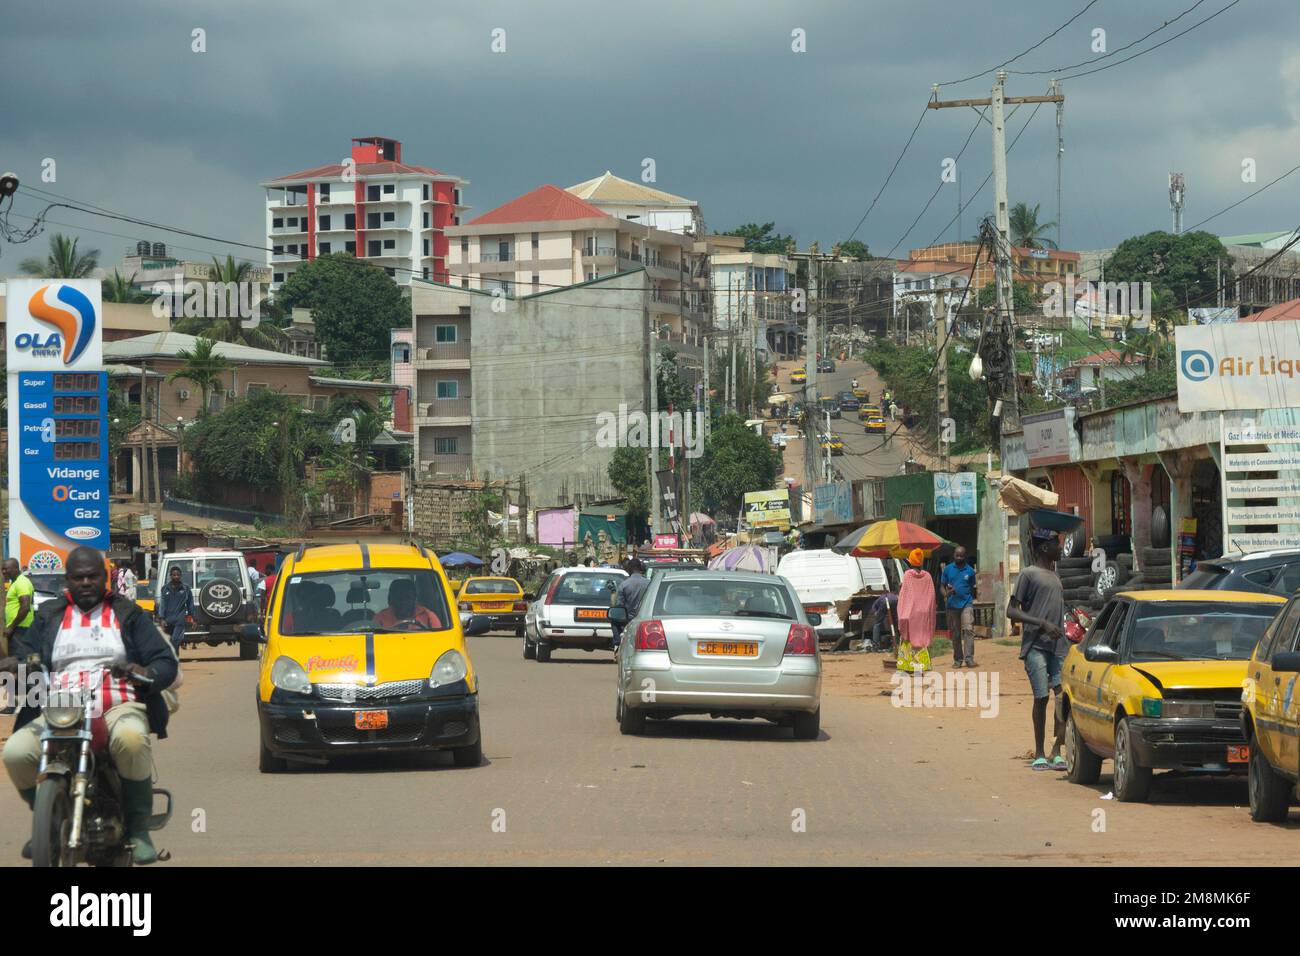 Yaounde street in Cameroon Stock Photo